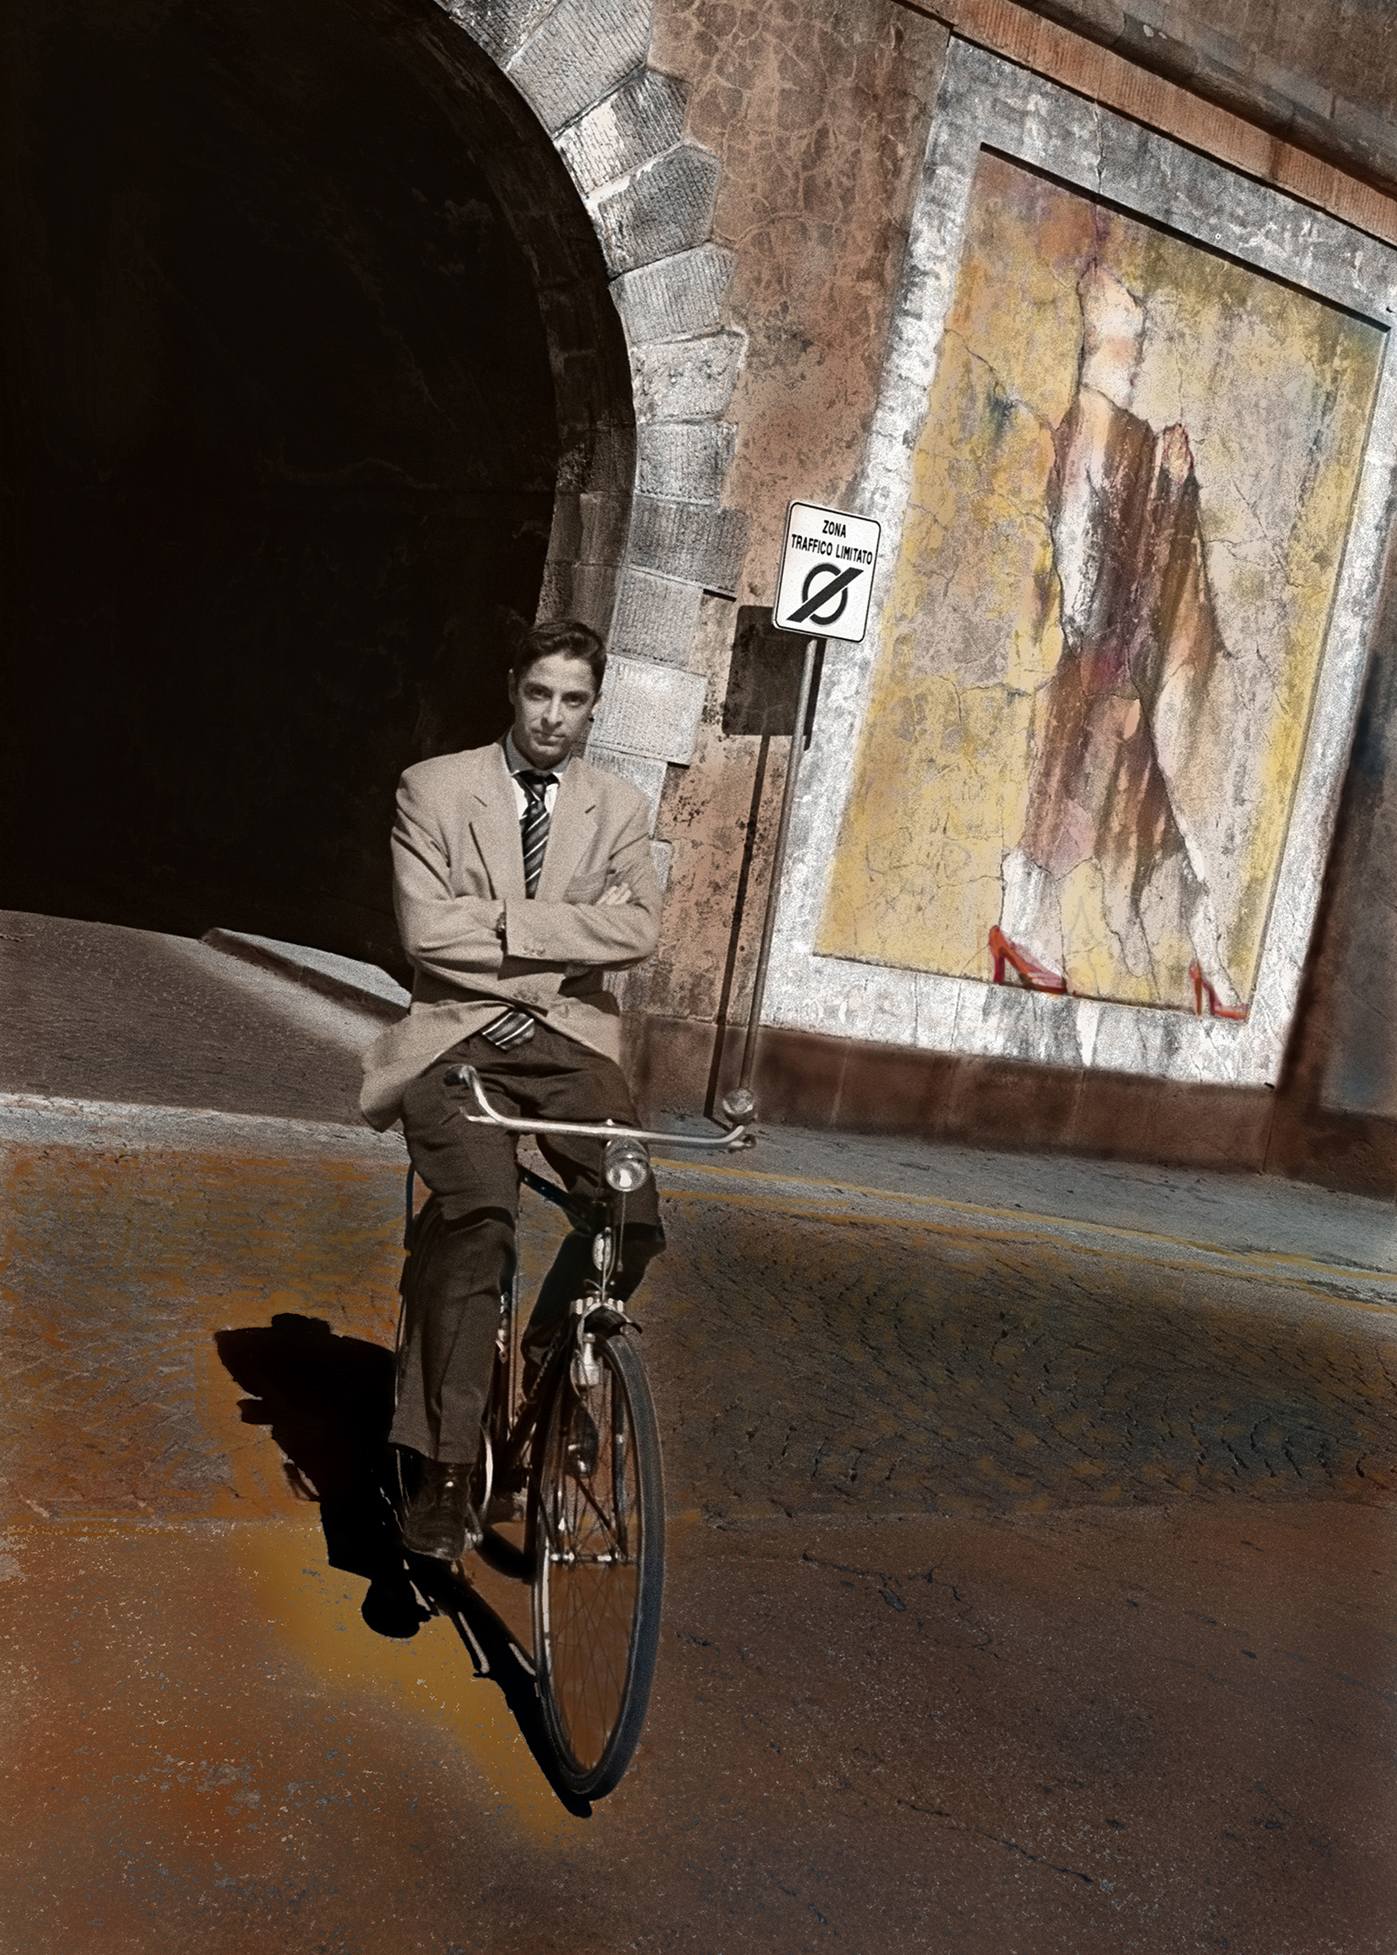 Lucca Italy  Man on Bicycle mural behind. Colored digital print